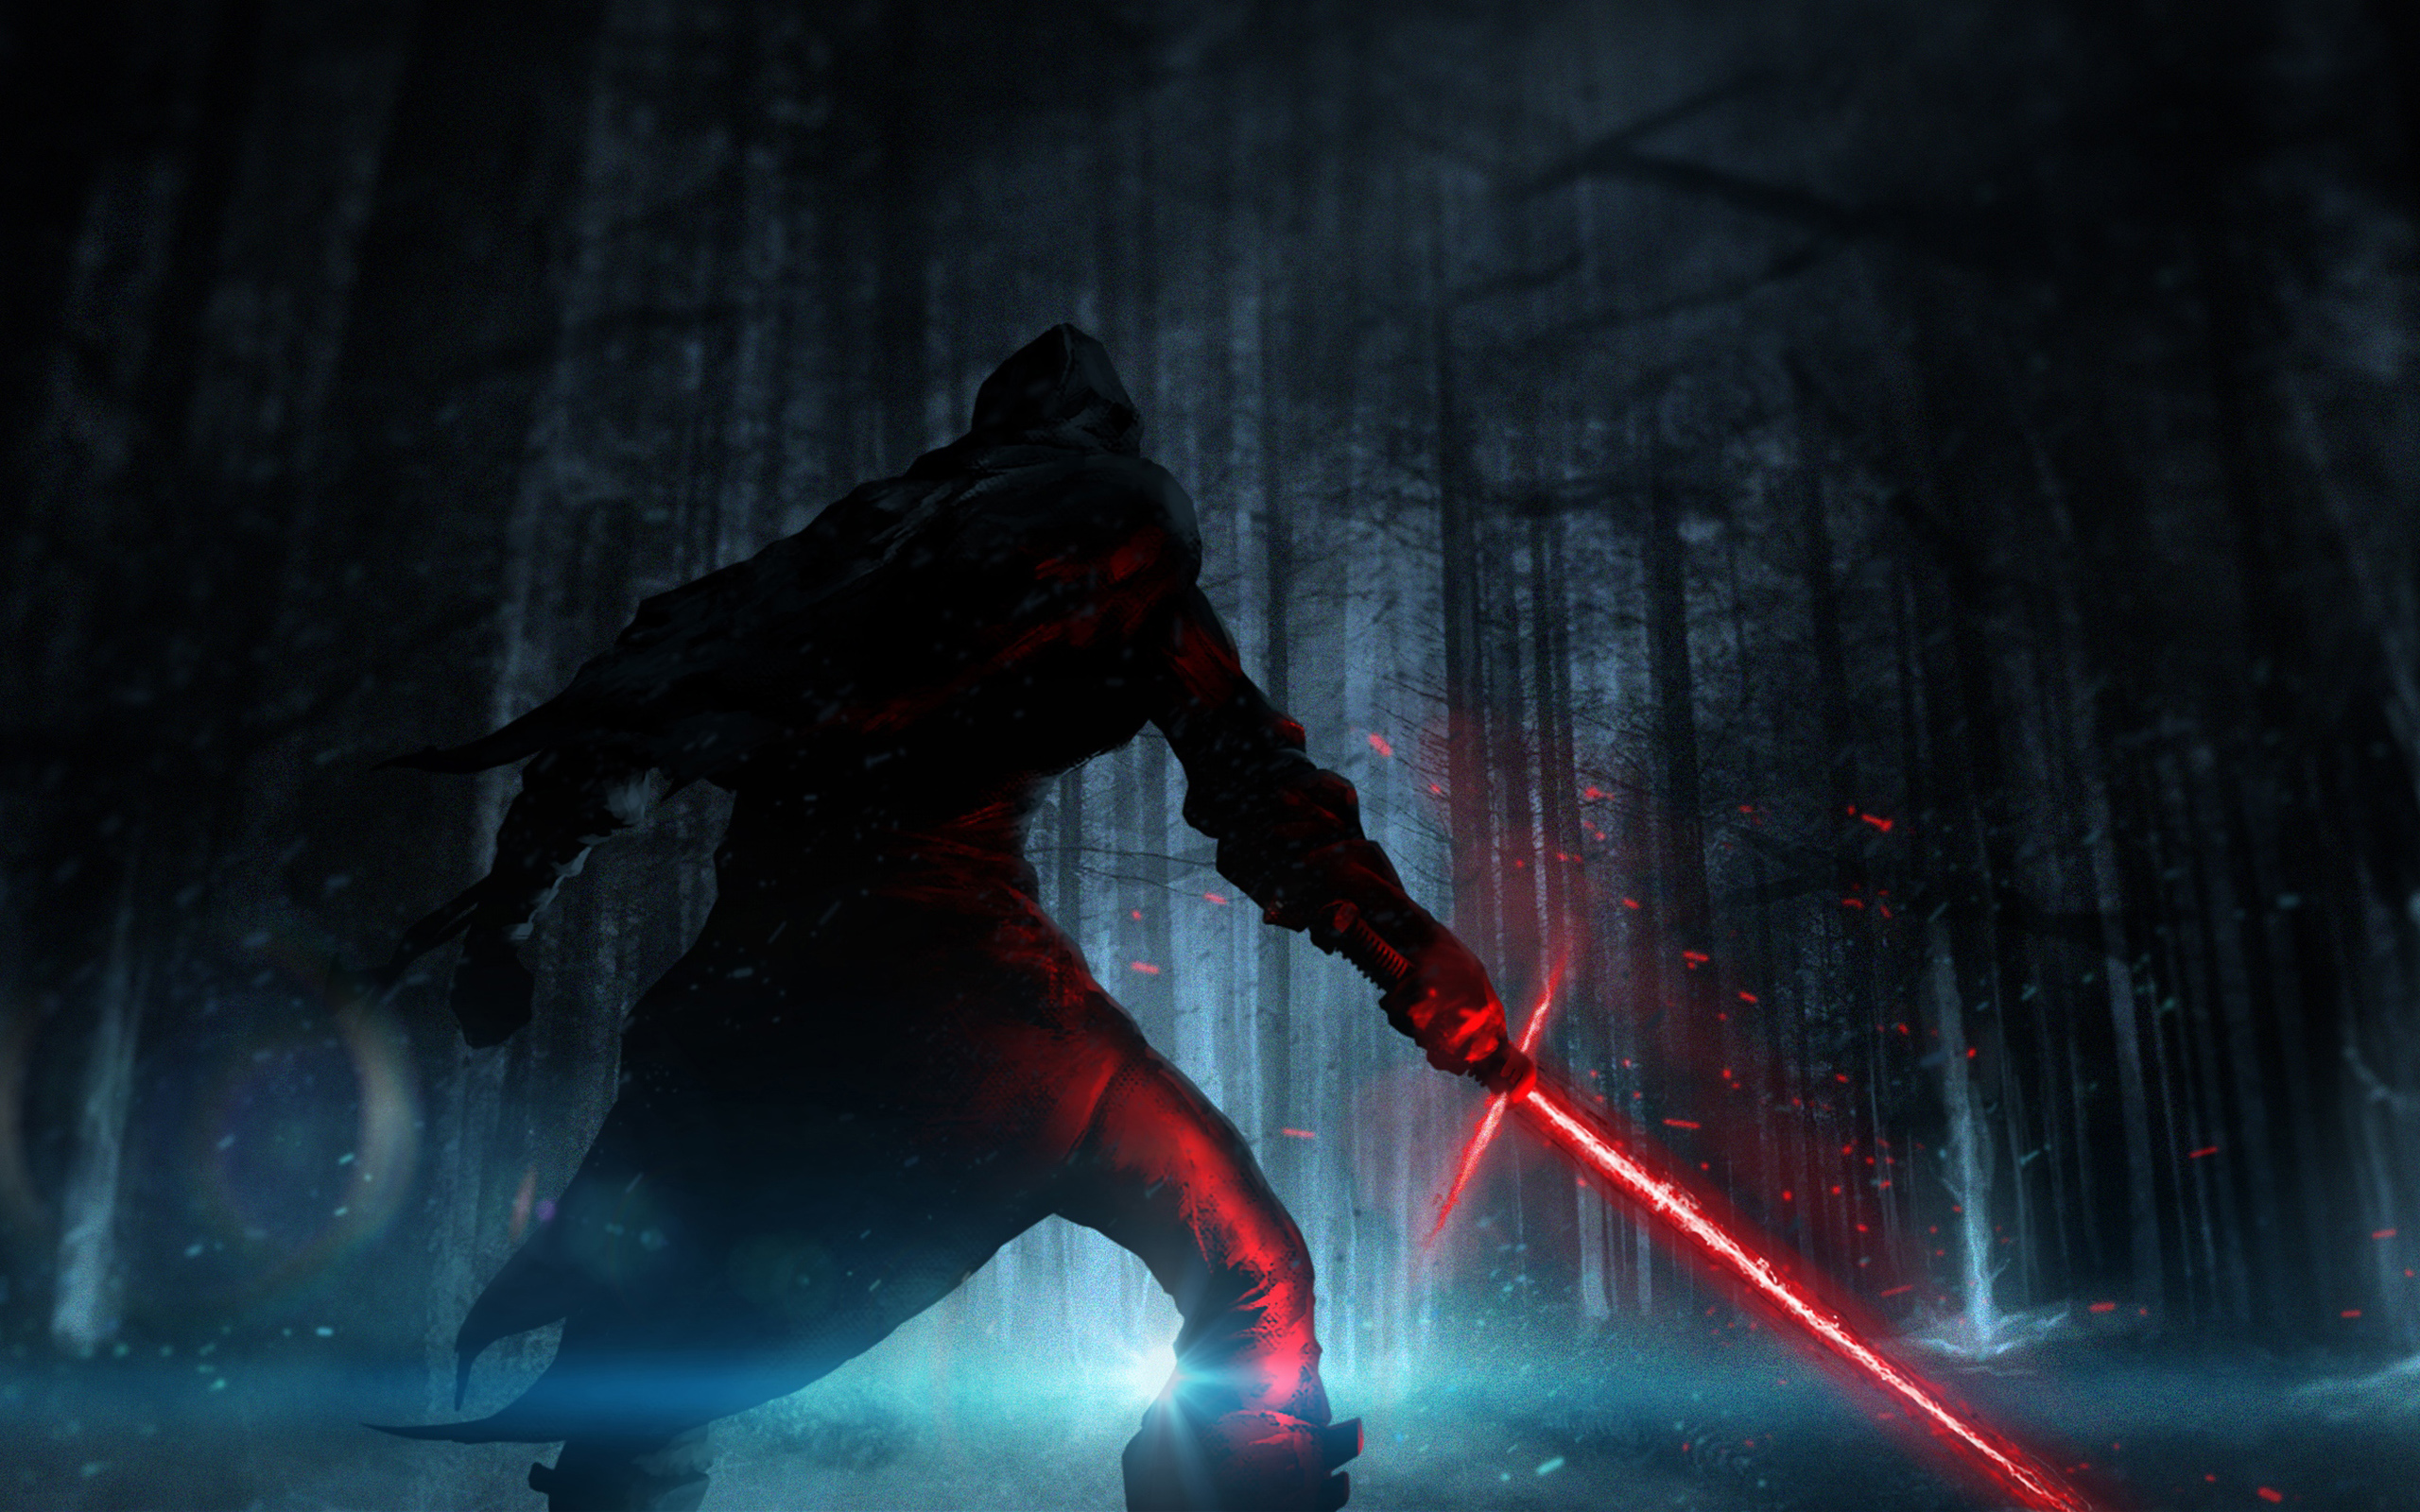 Star Wars Episode VII The Force Awakens Wallpapers and Background